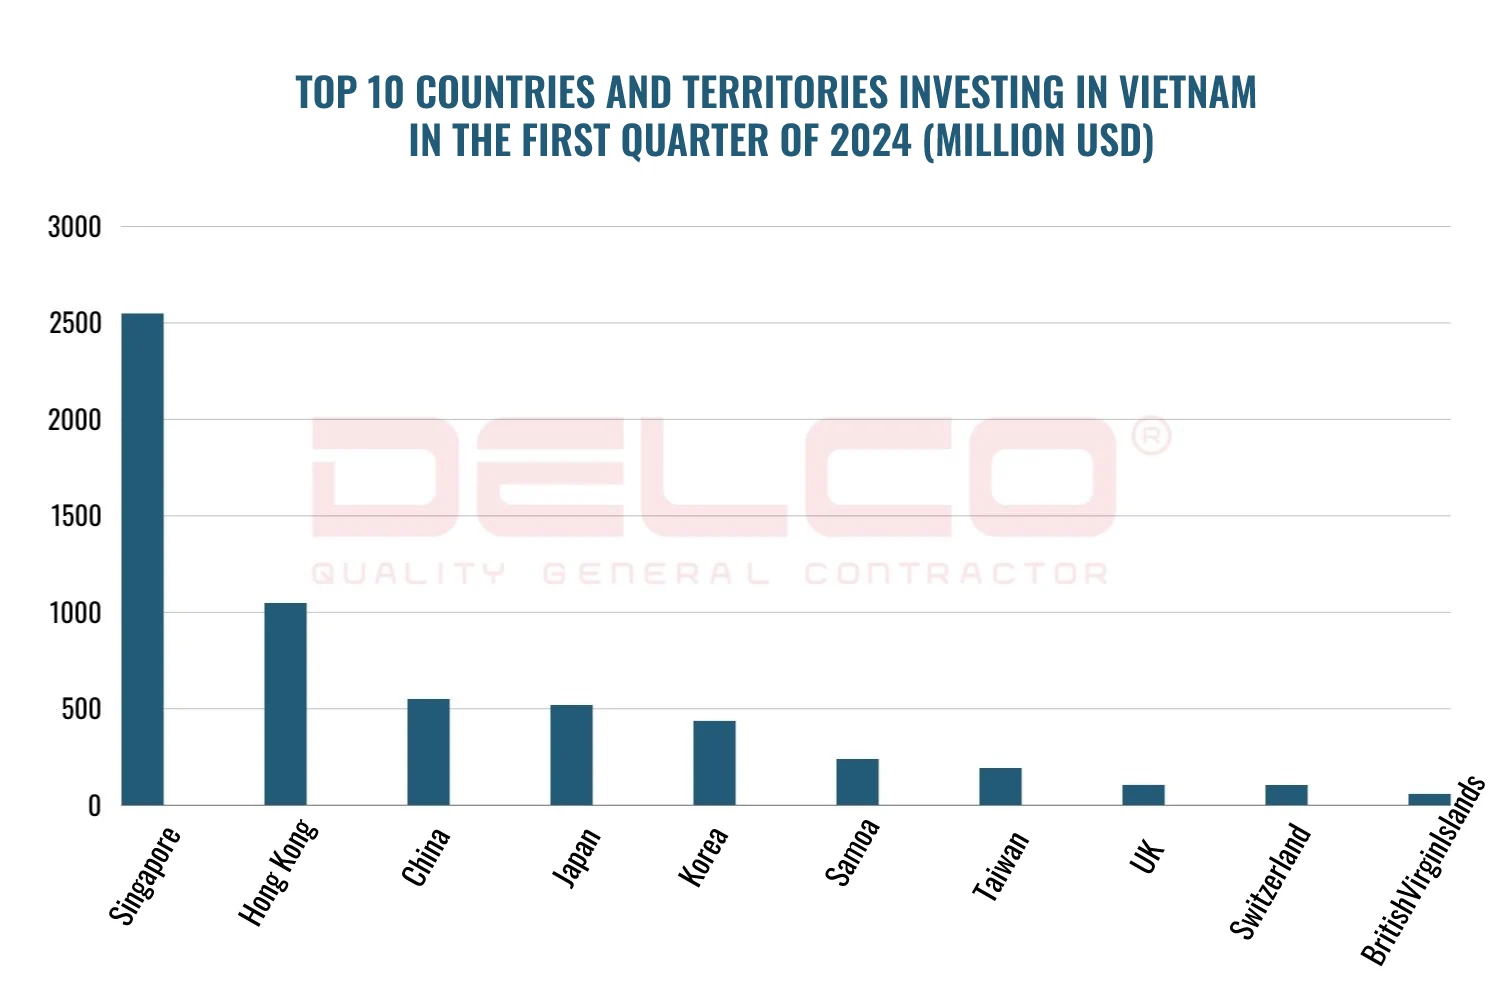 Top 10 countries and territories investing in Vietnam in the first quarter of 2024 (million USD)
